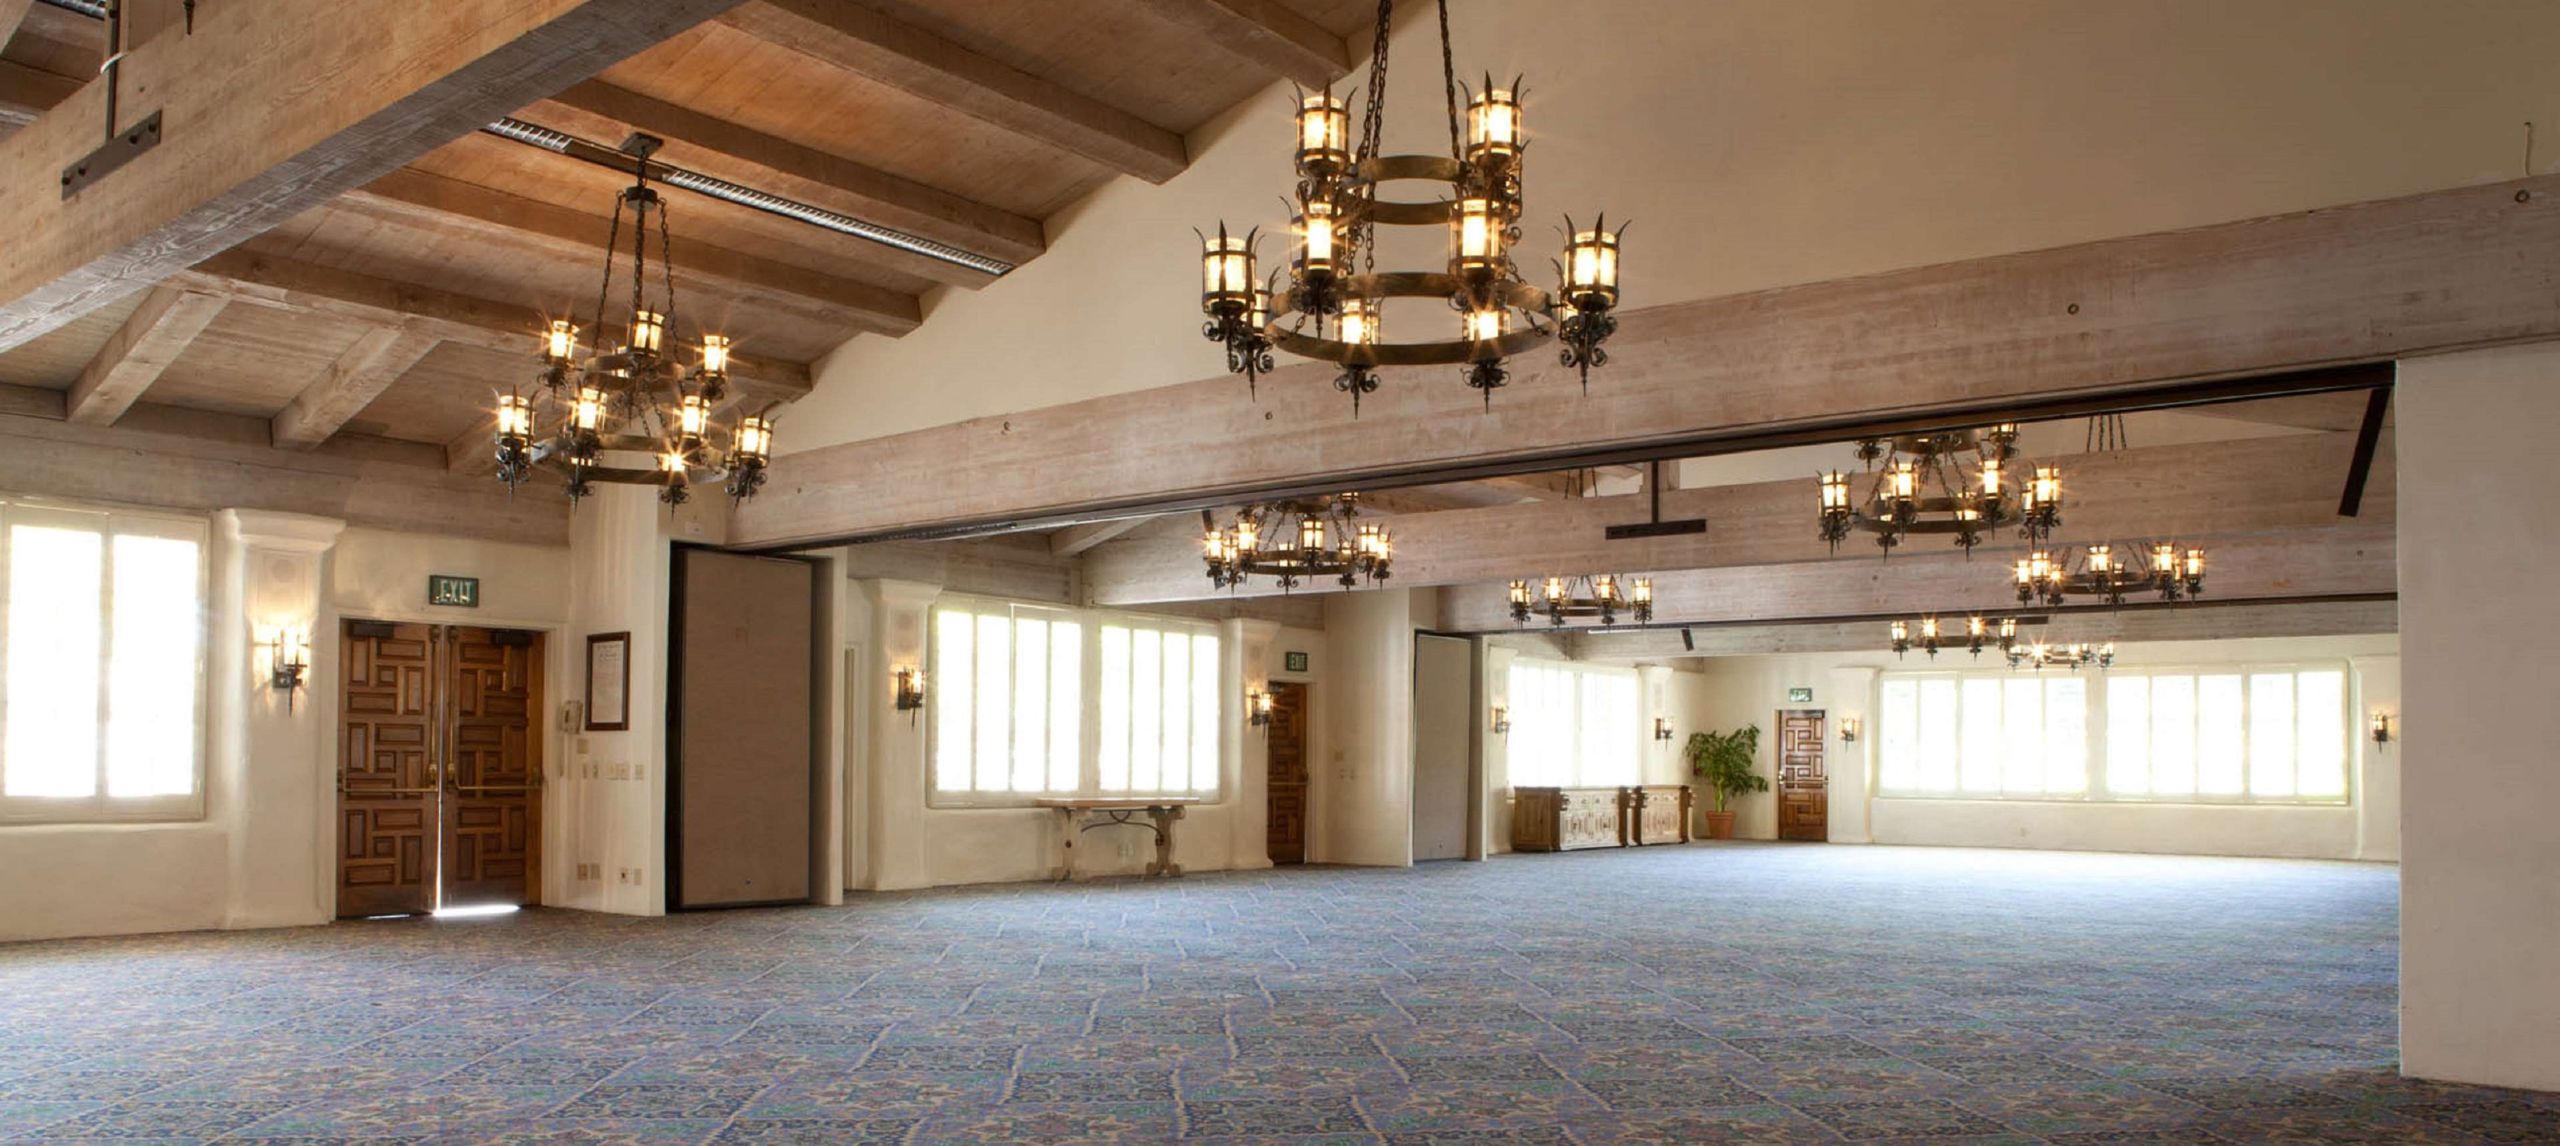 Large meeting room with chandeliers and wooden beams